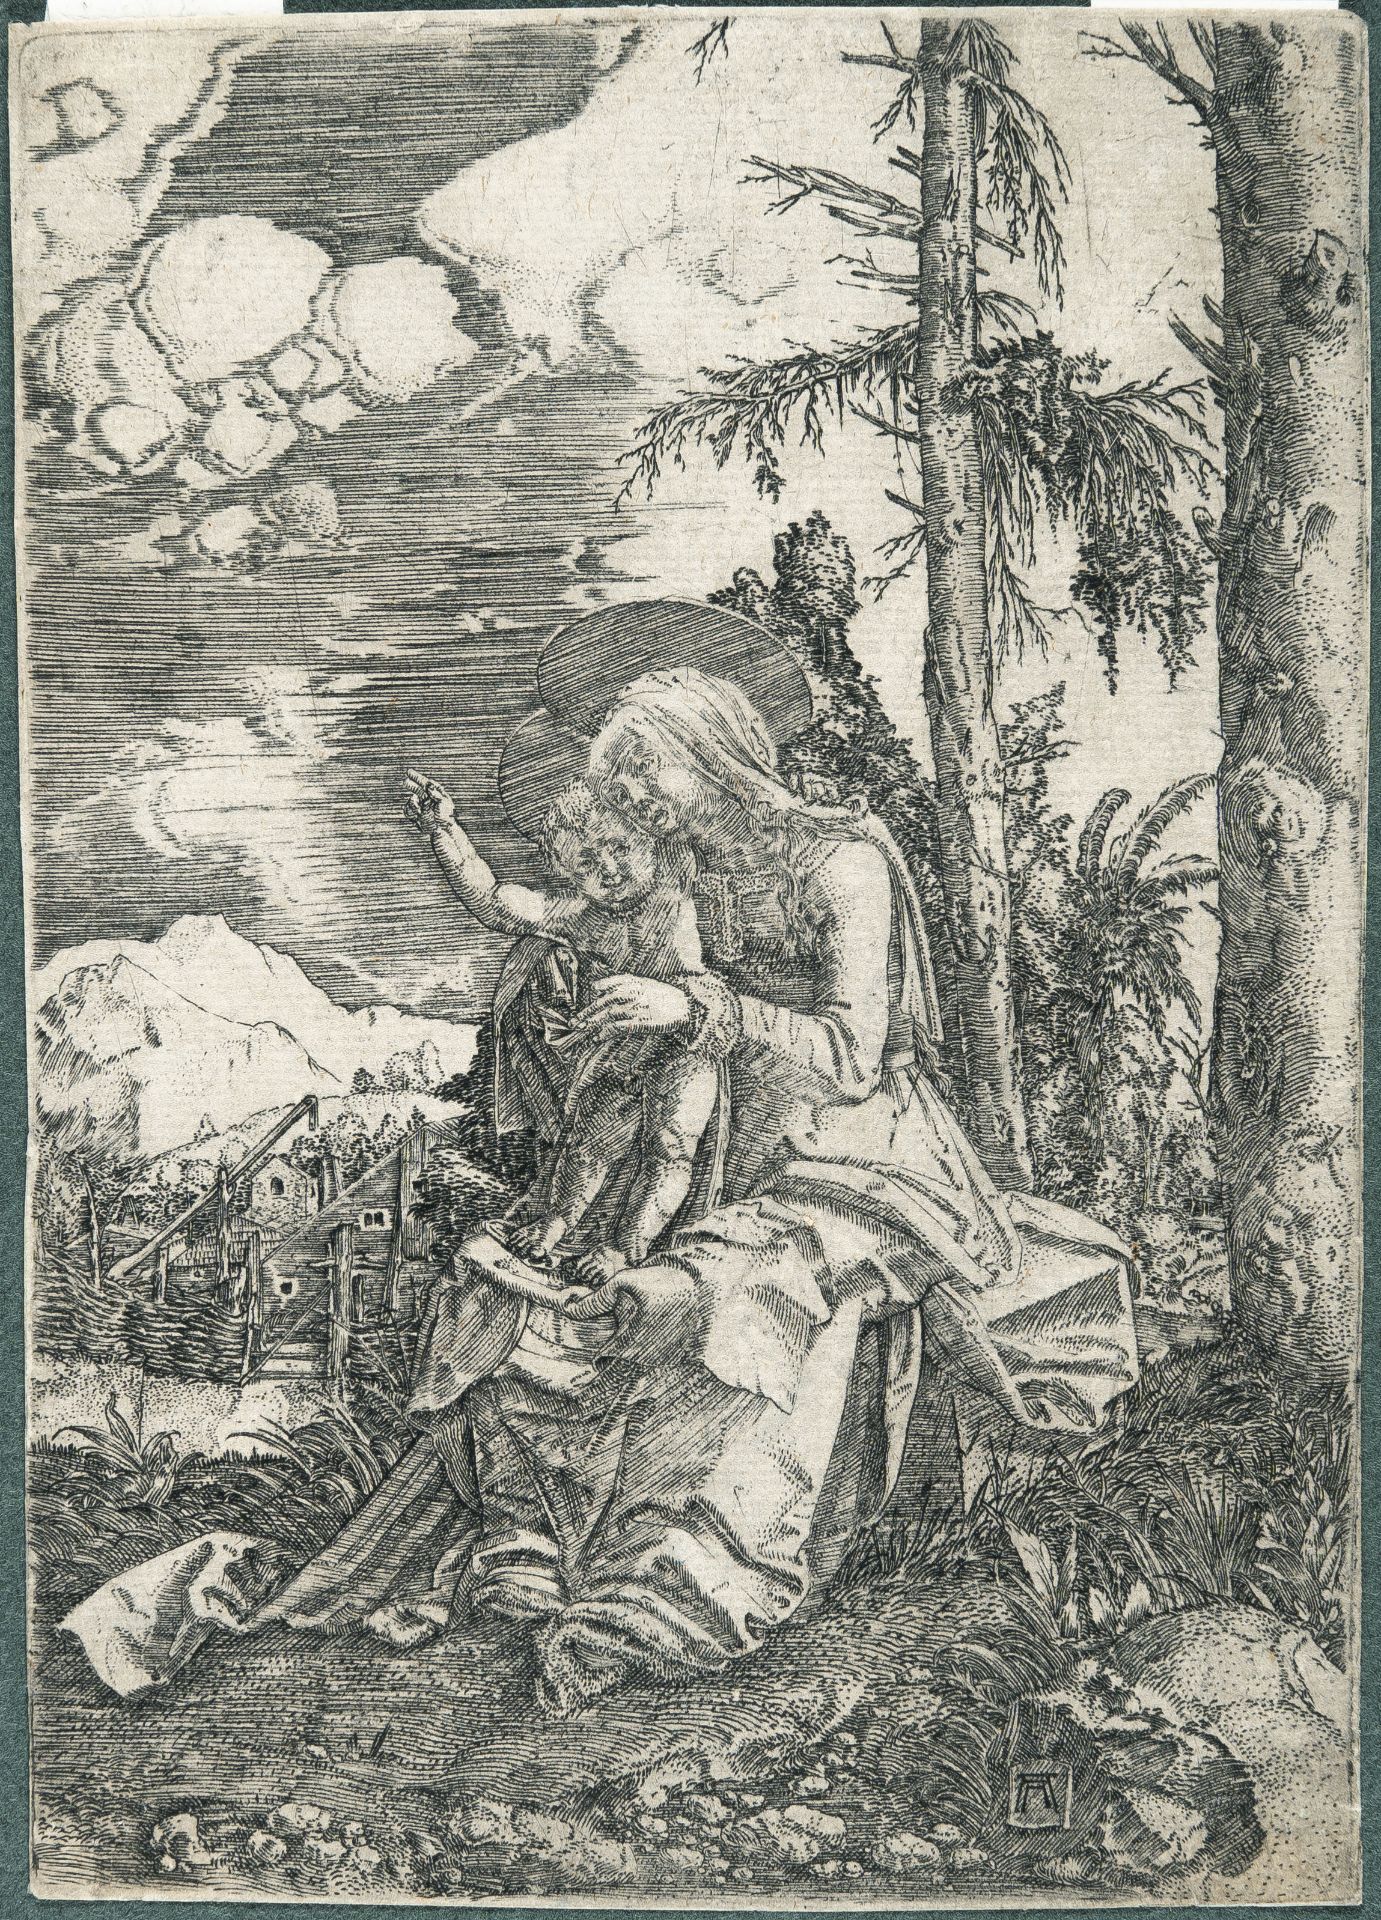 Albrecht Altdorfer, The Virgin with the blessing Christ Child.Engraving on laid paper with watermark - Image 2 of 3